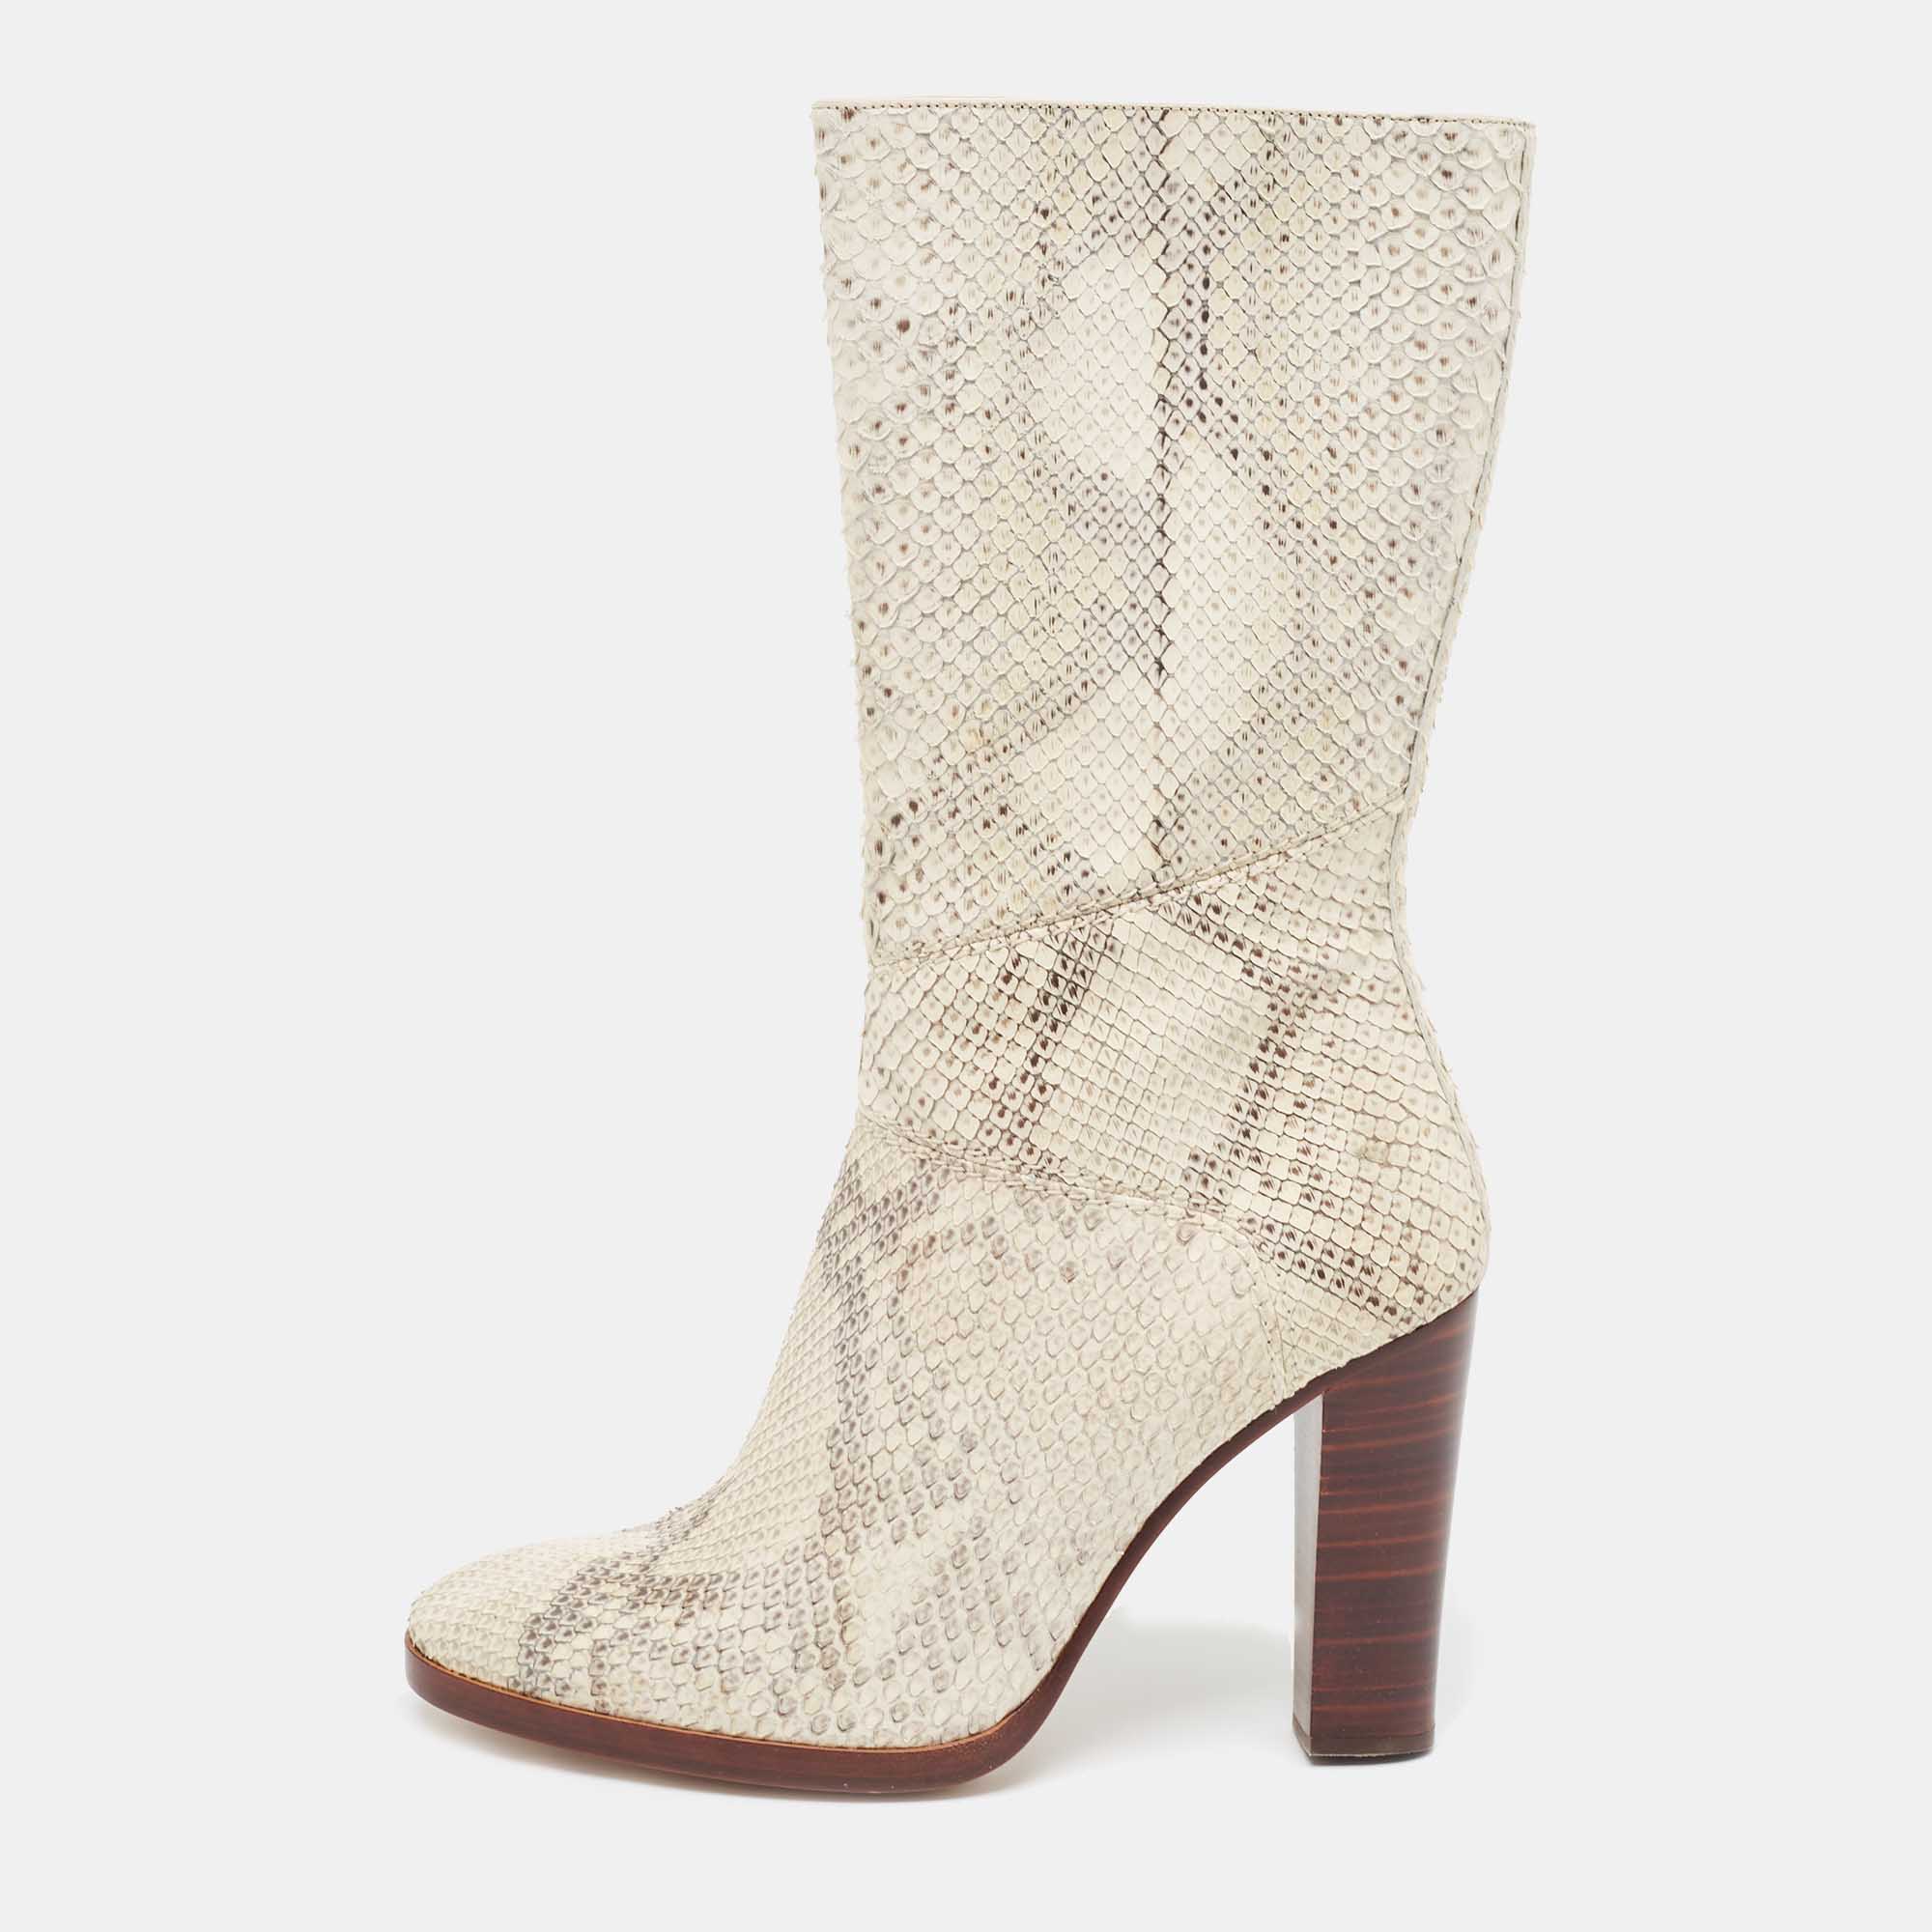 Chloé Two Tone Python Leather Adelie Mid Calf Boots Size 41.5